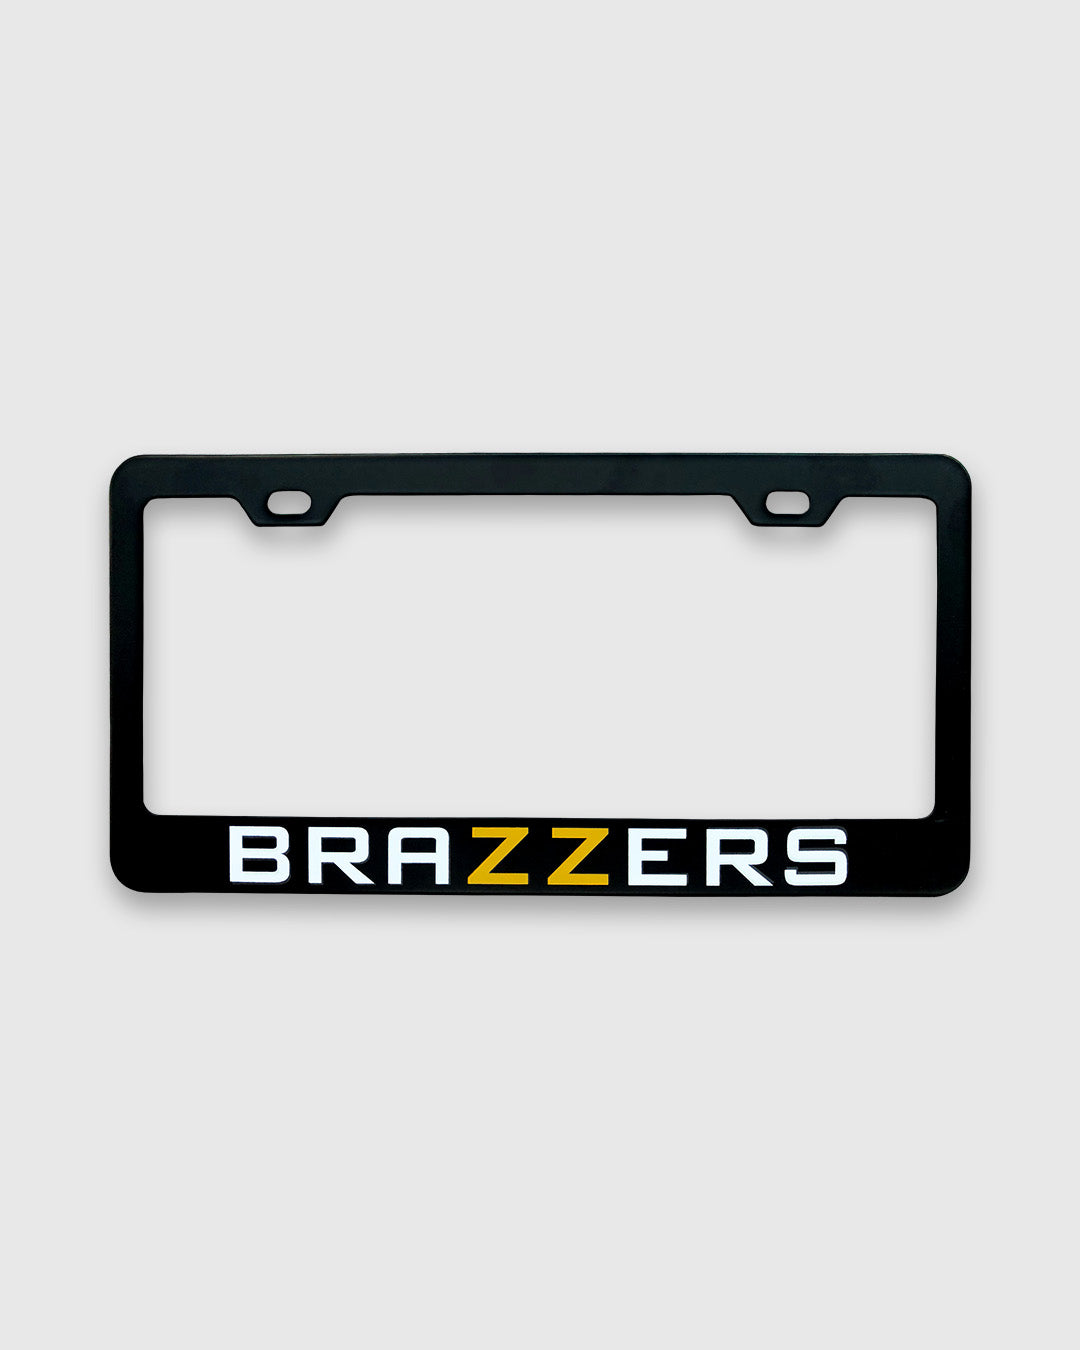 brazzers-license-plate-frame-US-CA